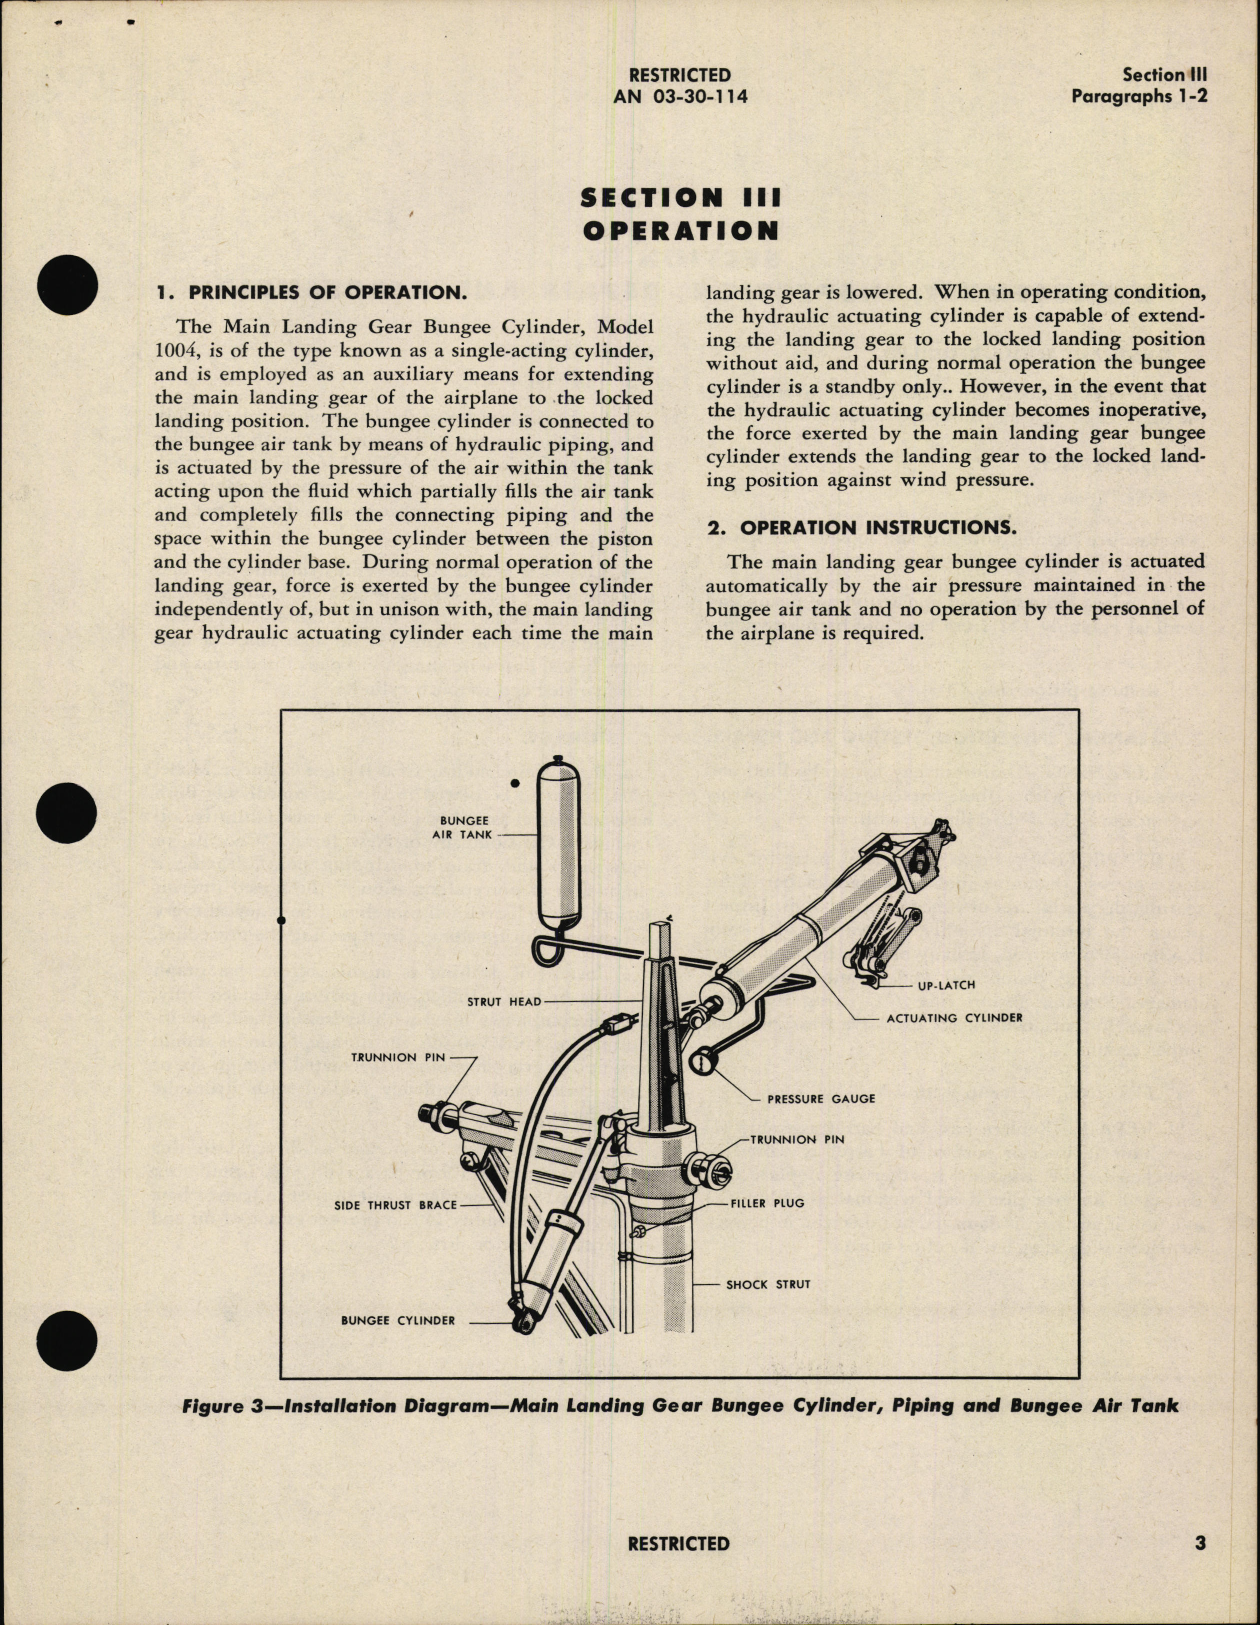 Sample page 7 from AirCorps Library document: Handbook of Overhaul Instructions with Parts Catalog Model 1004 Main Landing Gear Bungee Cylinder